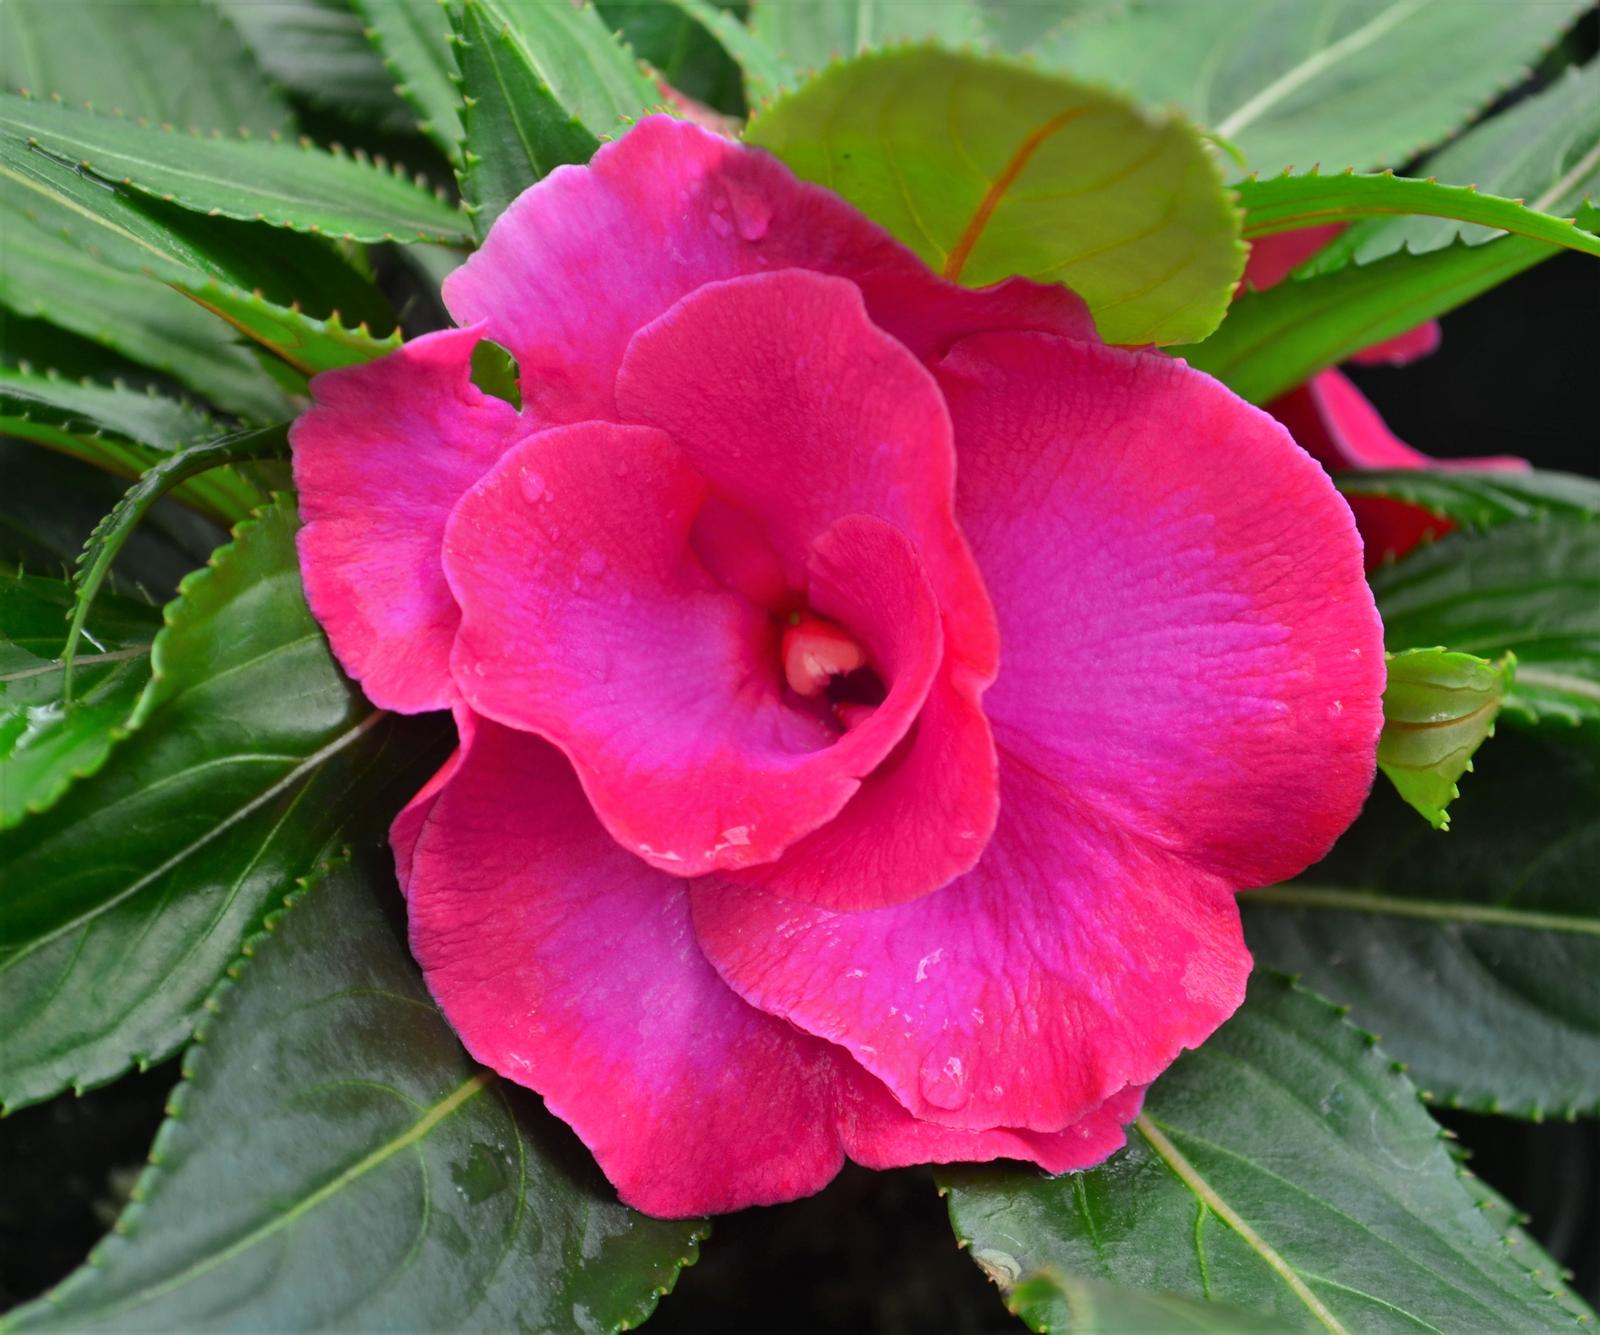 Impatiens hawkeri Roller Coaster 'Hot Pink' - Impatiens New Guinea RC Hot Pink from Hillcrest Nursery